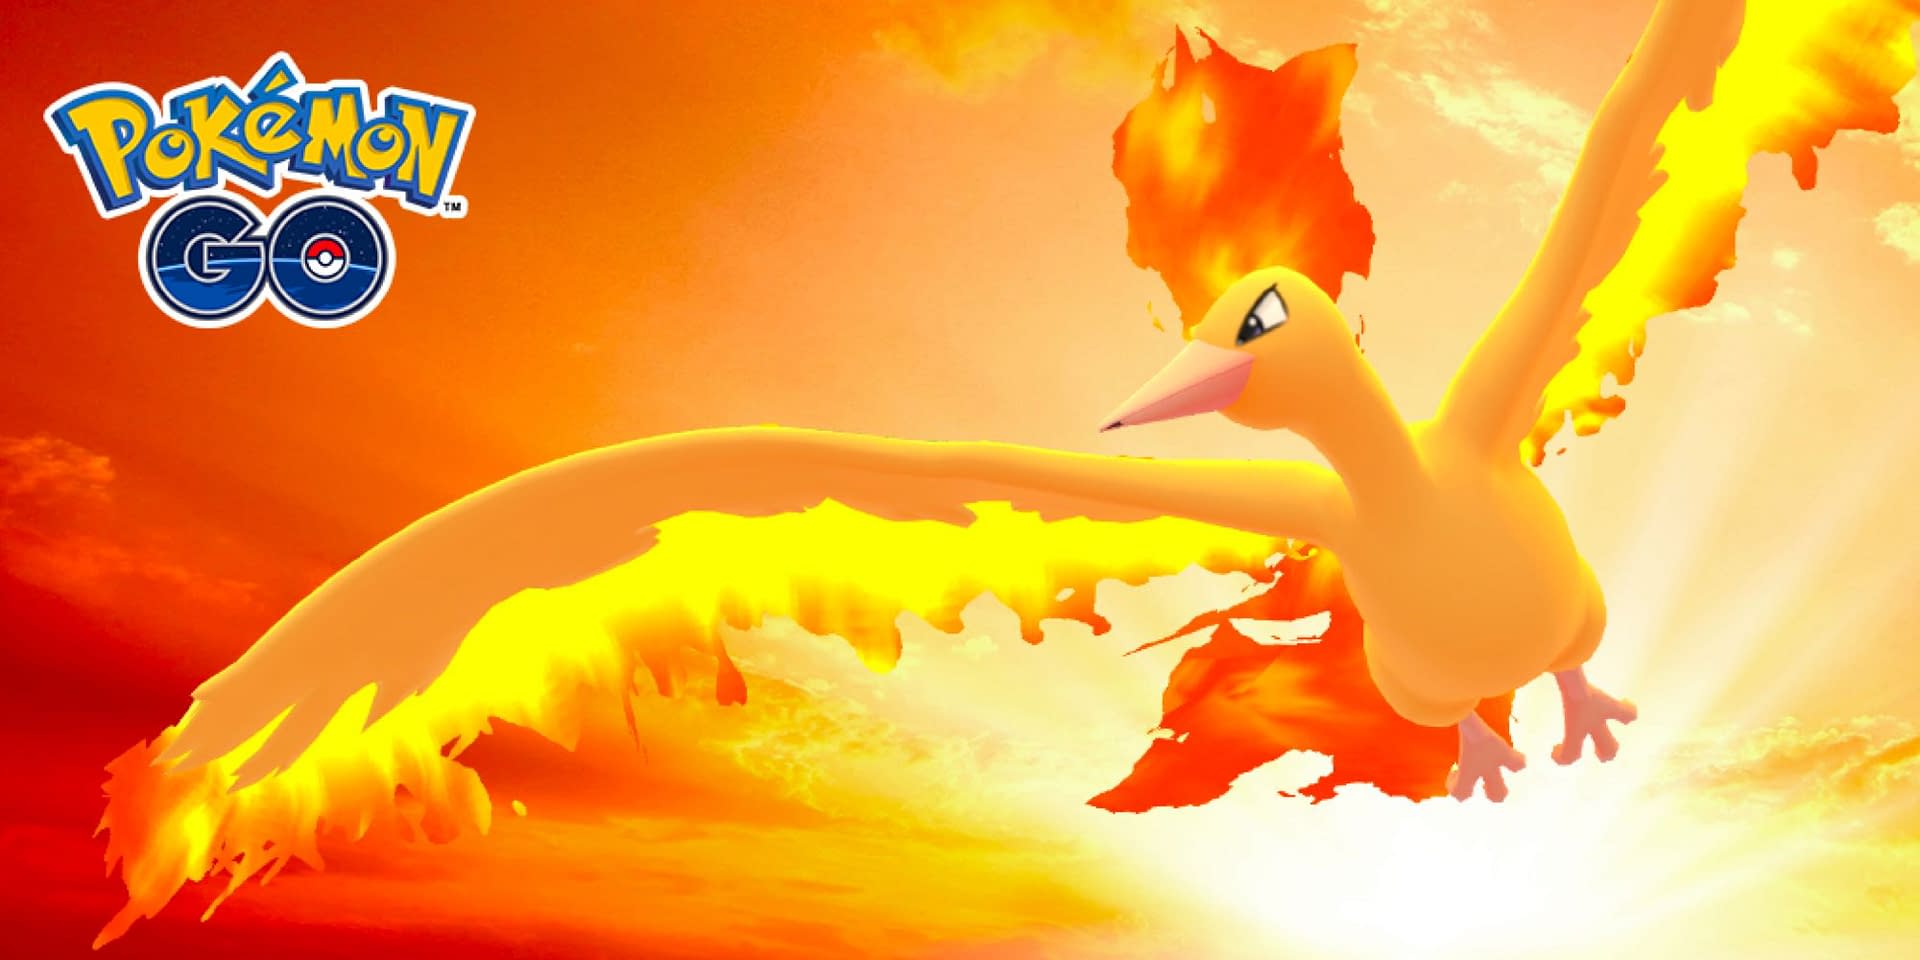 Head simultaneously empty and full of ideas oh no — I might've overdid it  with the shiny moltres